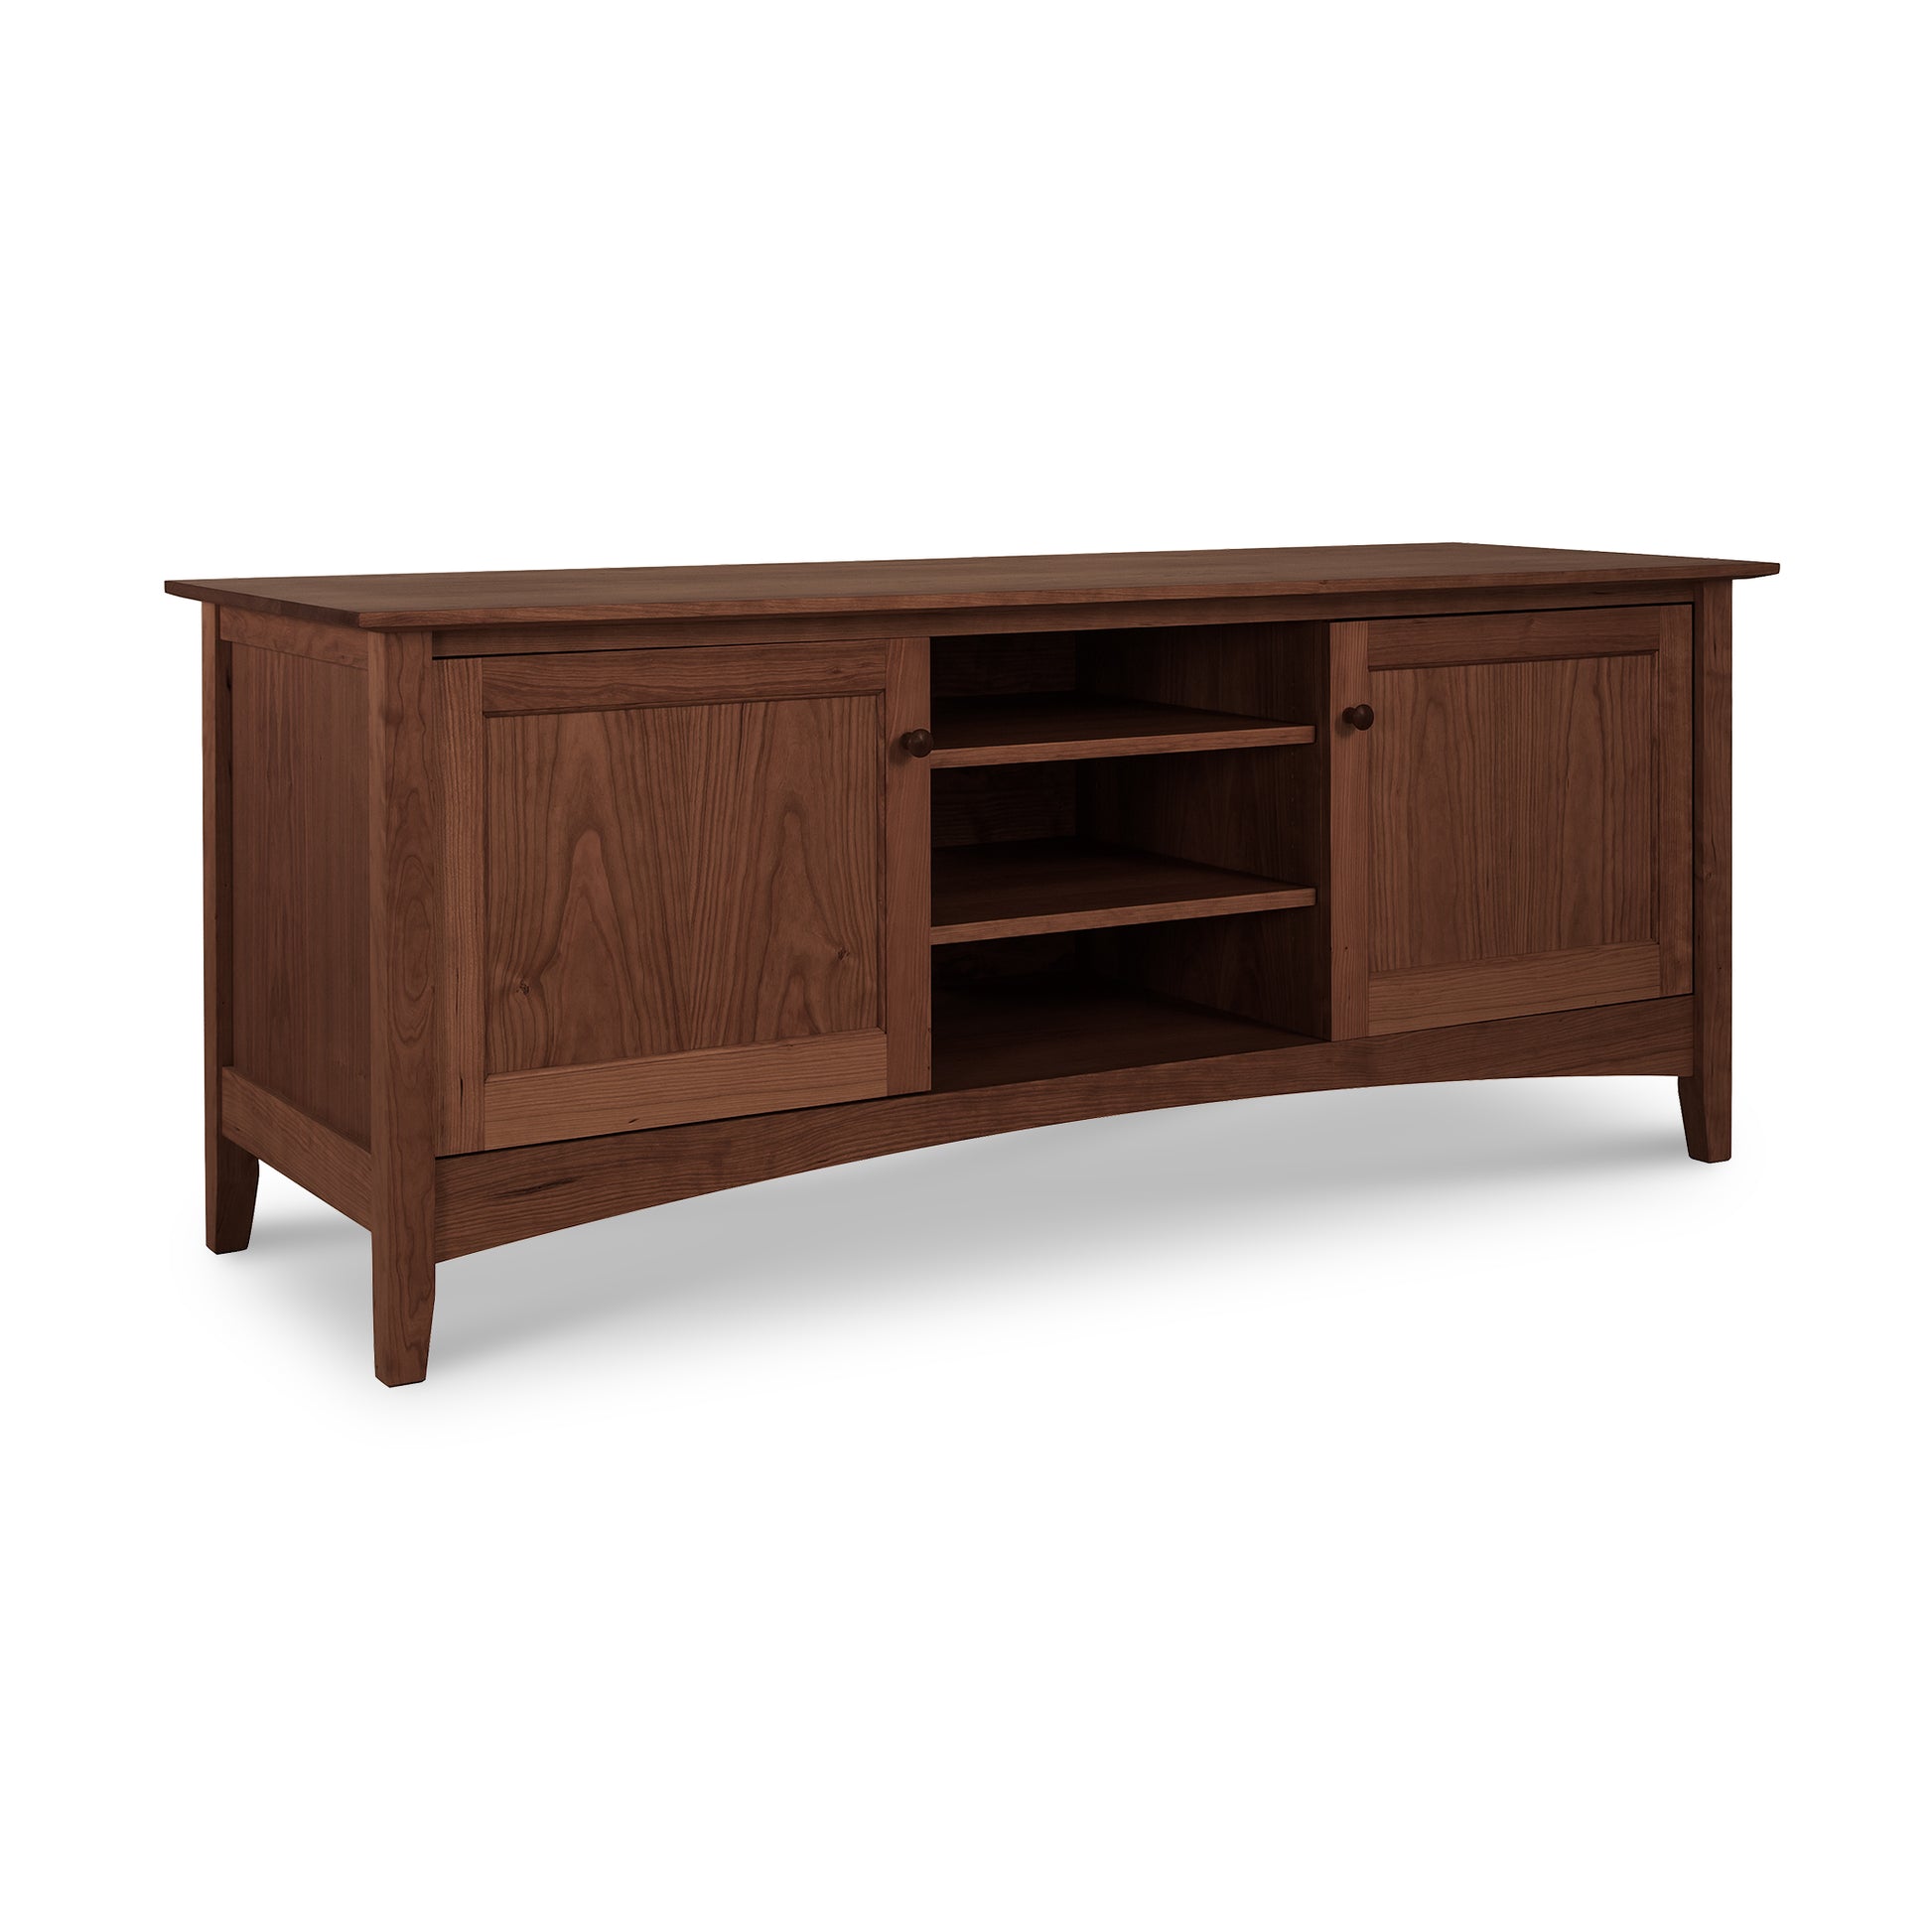 An Maple Corner Woodworks American Shaker 67" TV stand featuring closed cabinets on each side and open shelves in the middle, set against a white background.